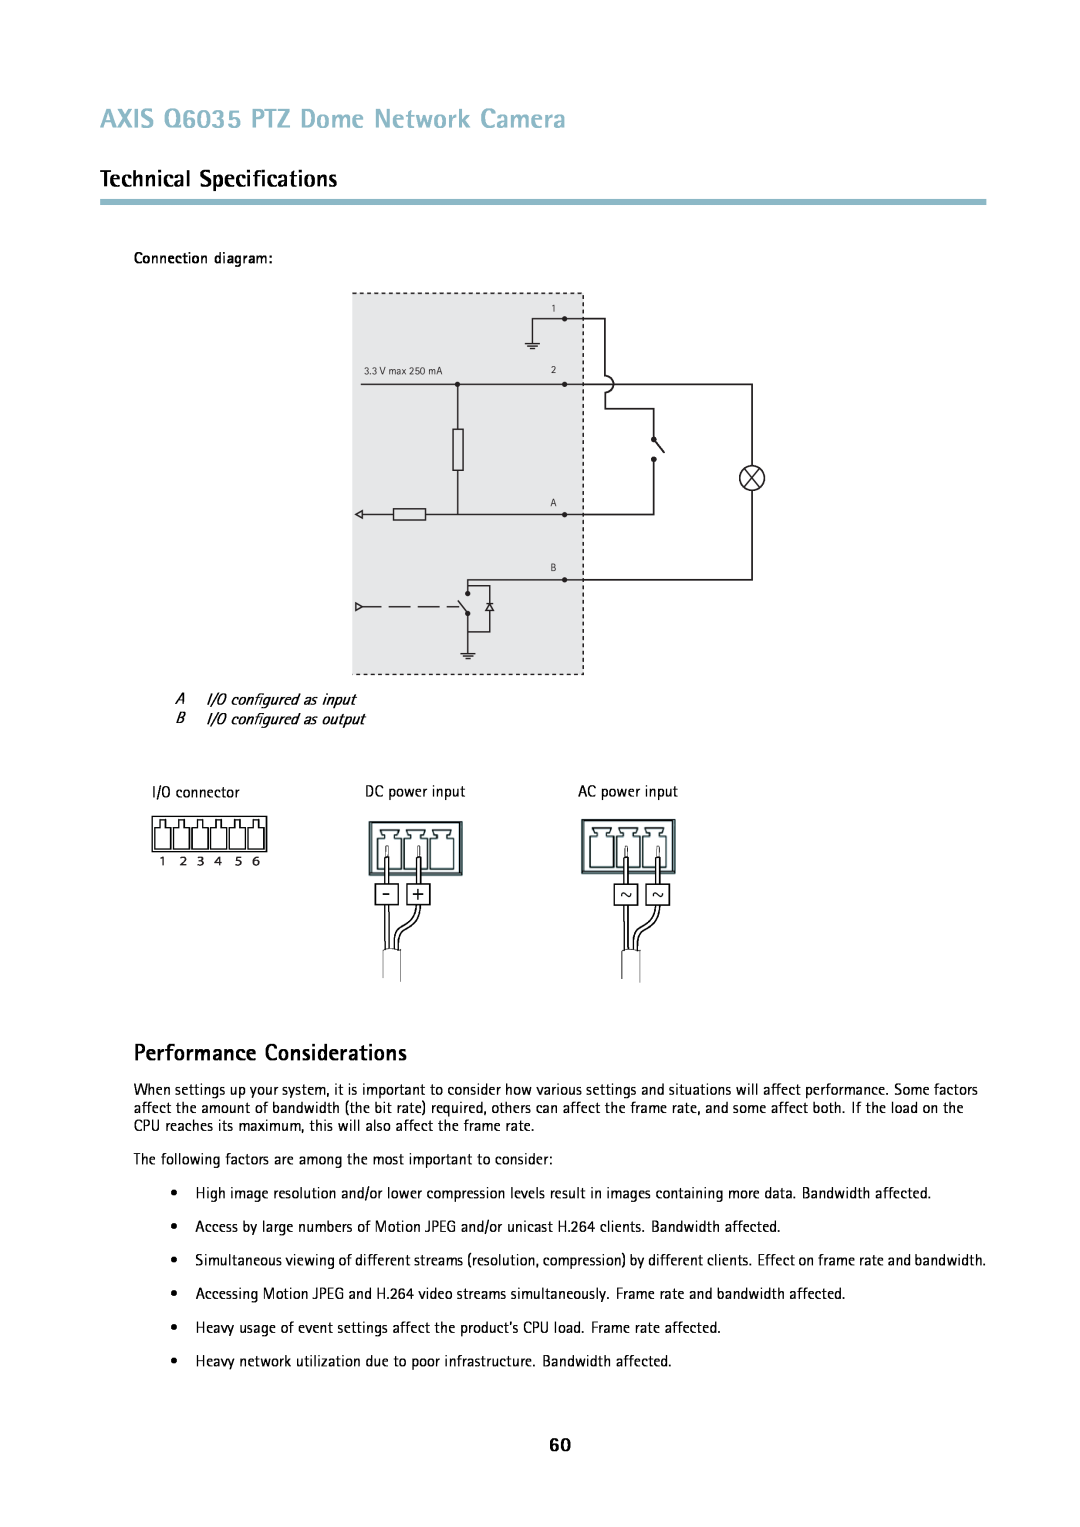 Axis Communications axis communications dome network camera user manual Performance Considerations, Connection diagram 